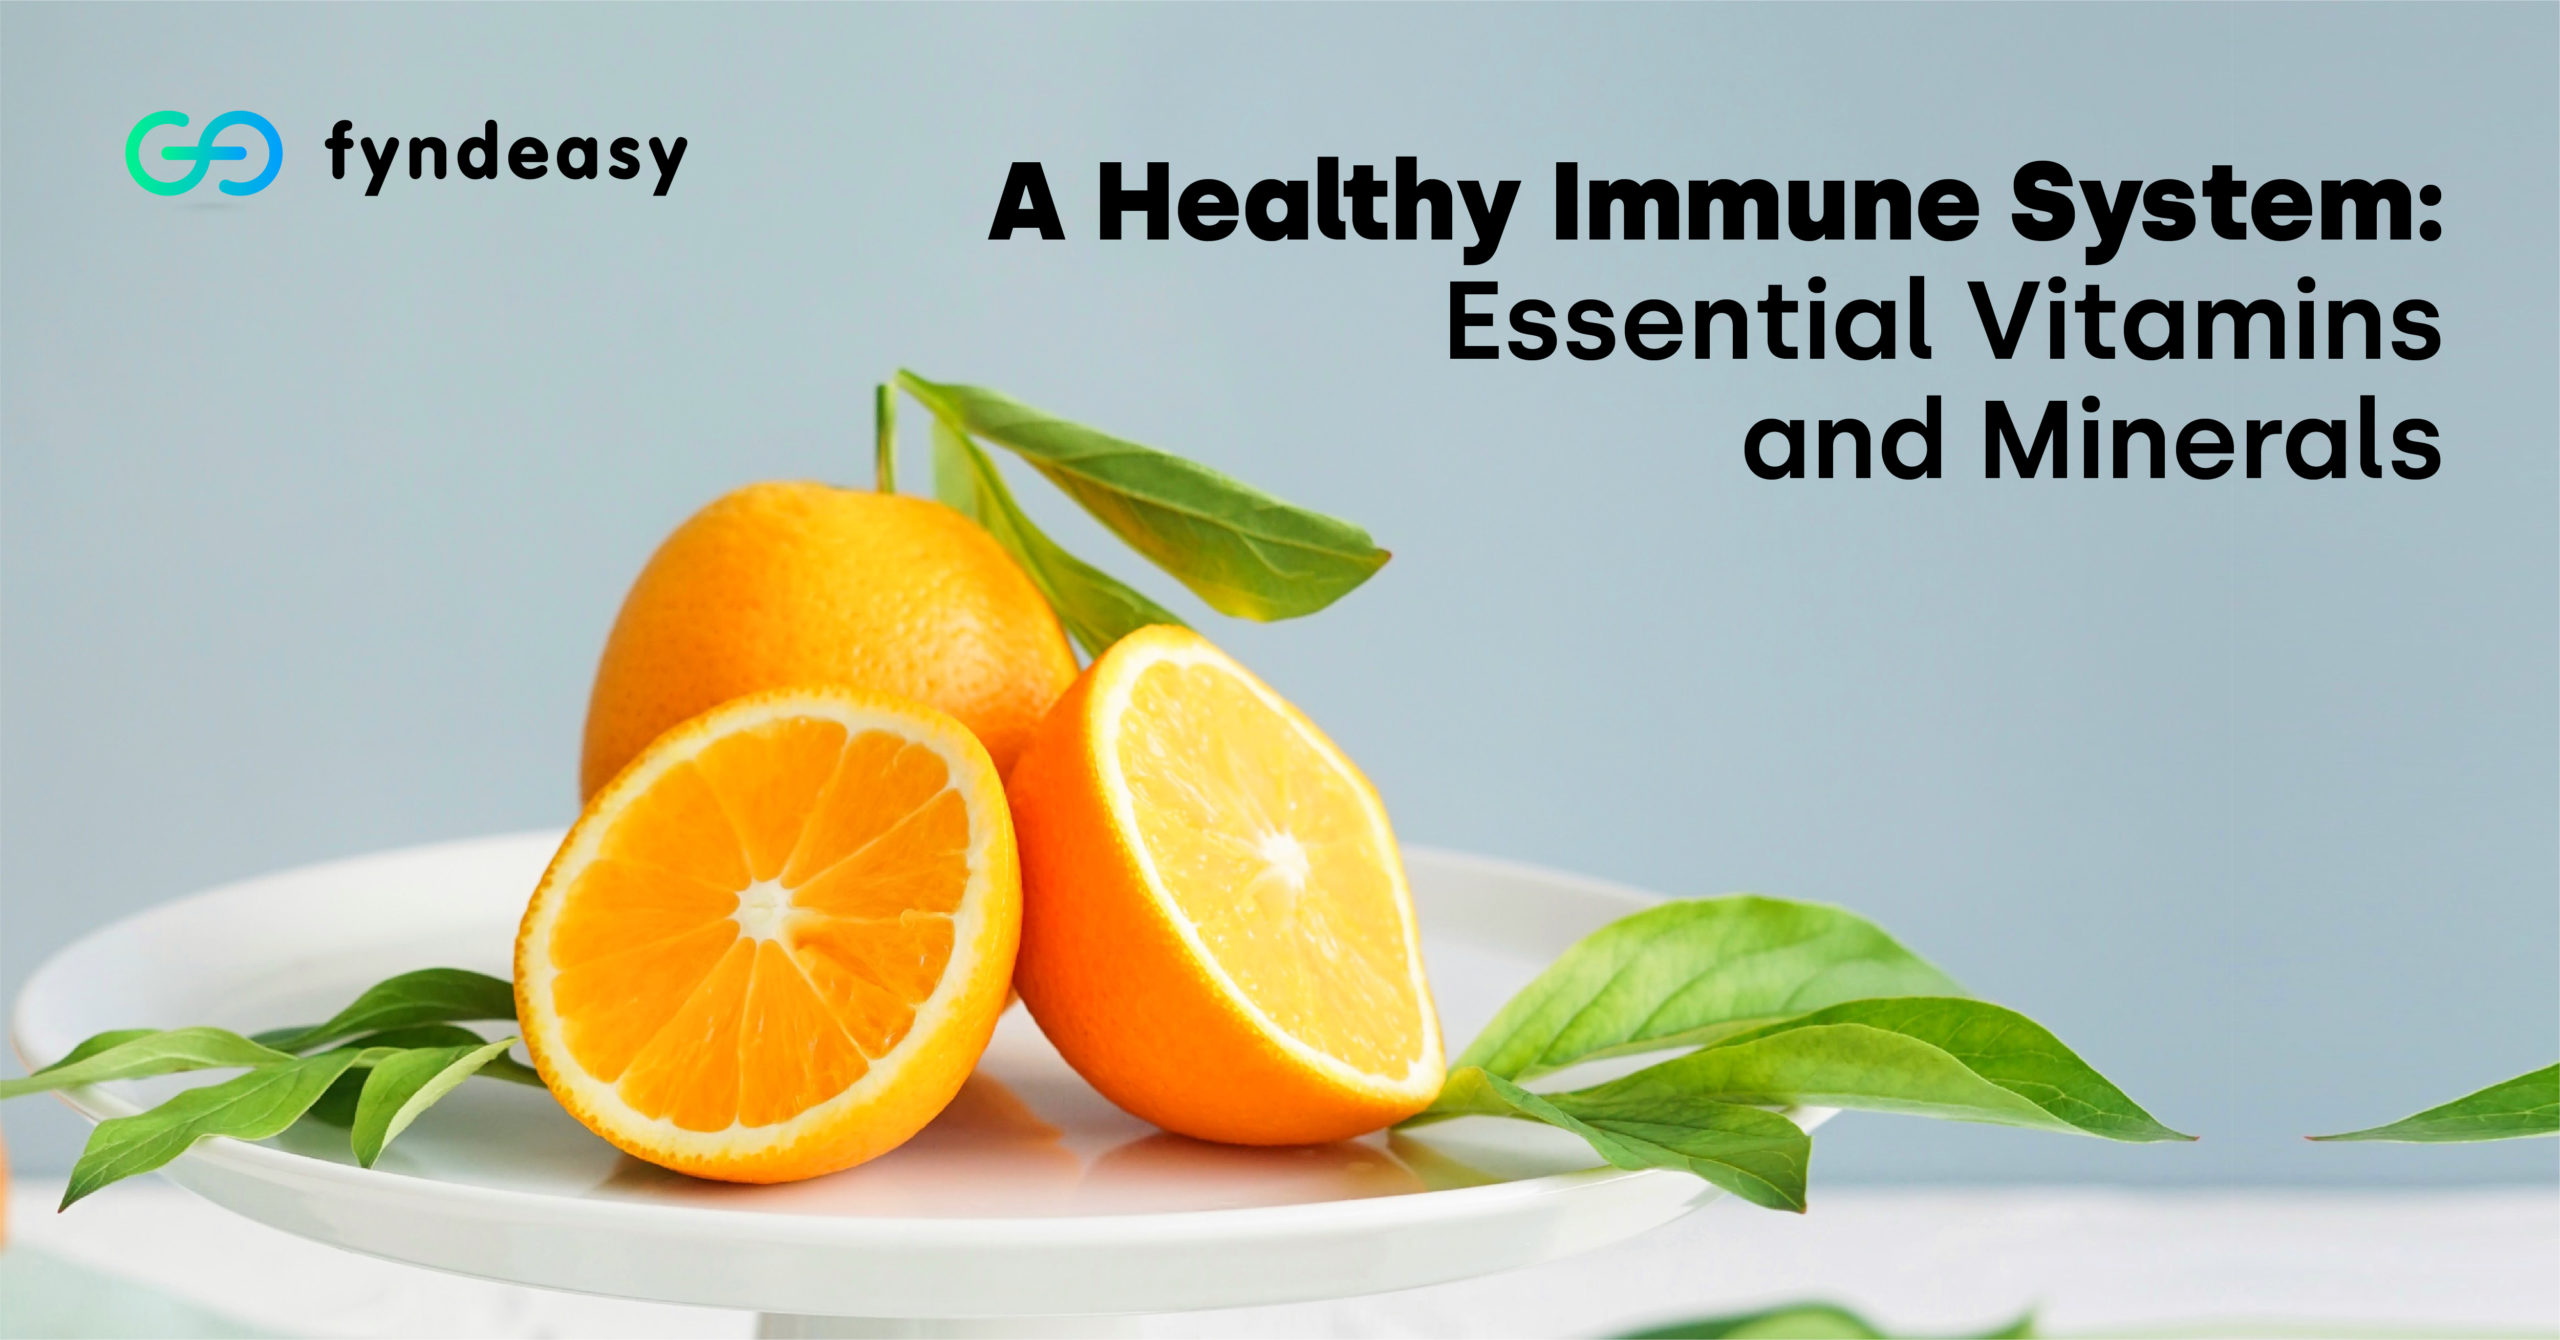 a healthy immune system: essential vitamins and minerals